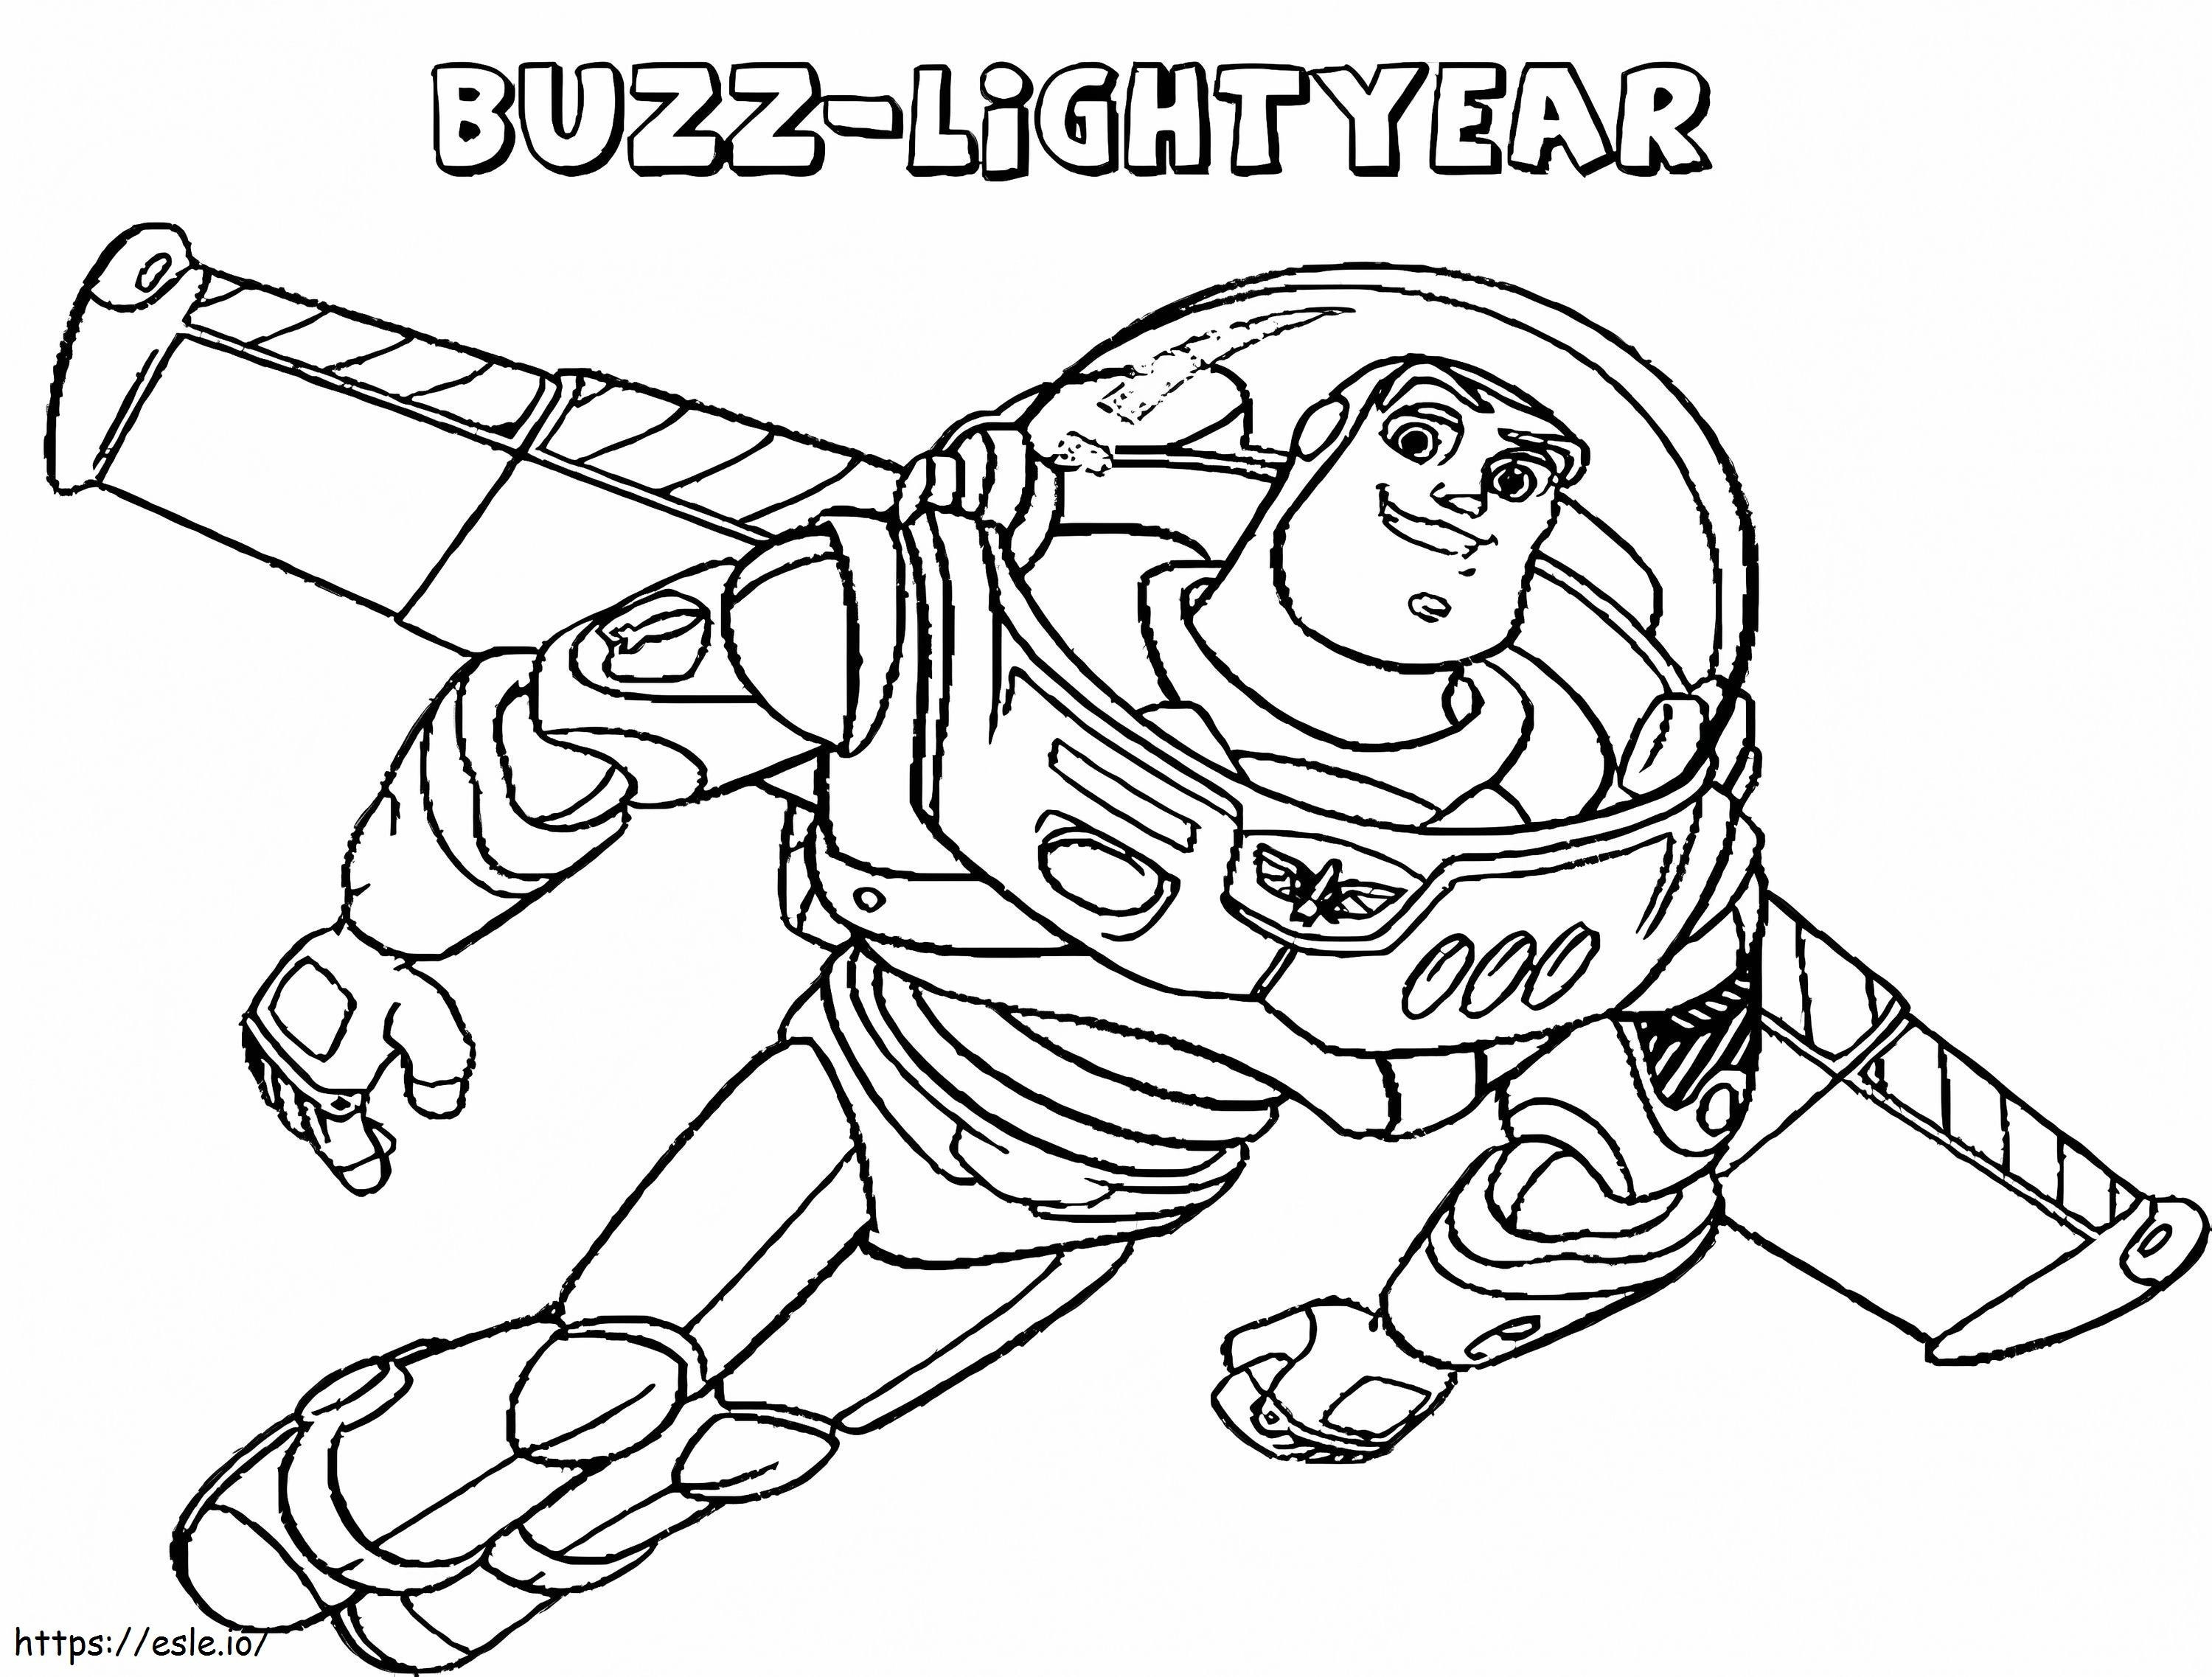 Buzz Lightyear 5 coloring page